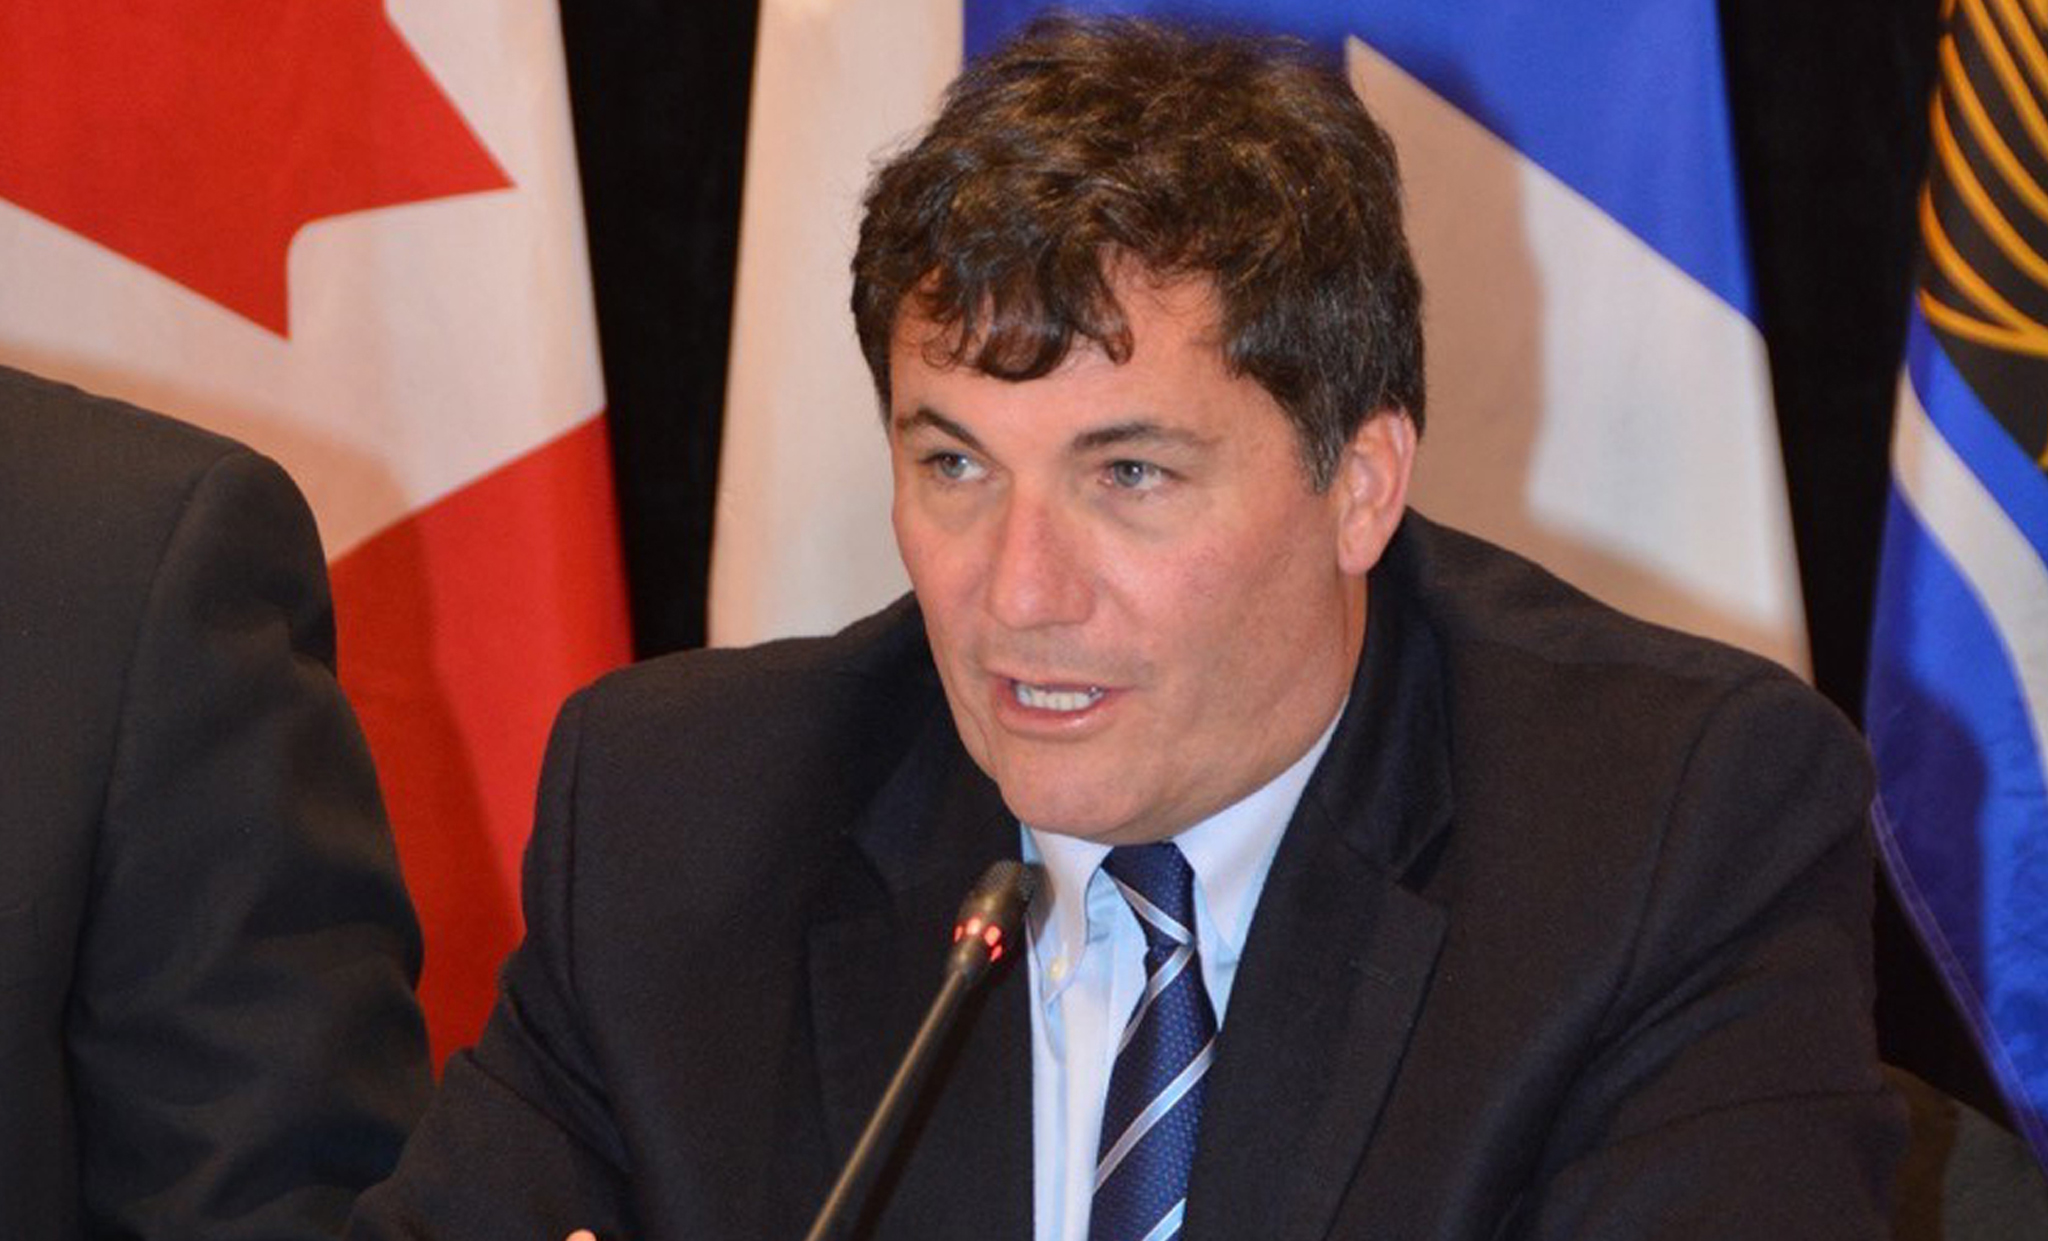 January 27, 2017 - The Honourable Dominic LeBlanc, Minister of Fisheries, Oceans and the Canadian Coast Guard, speaks at a meeting of federal and provincial officials in Wolfville, Nova Scotia, to discuss progress on the Atlantic Growth Strategy.